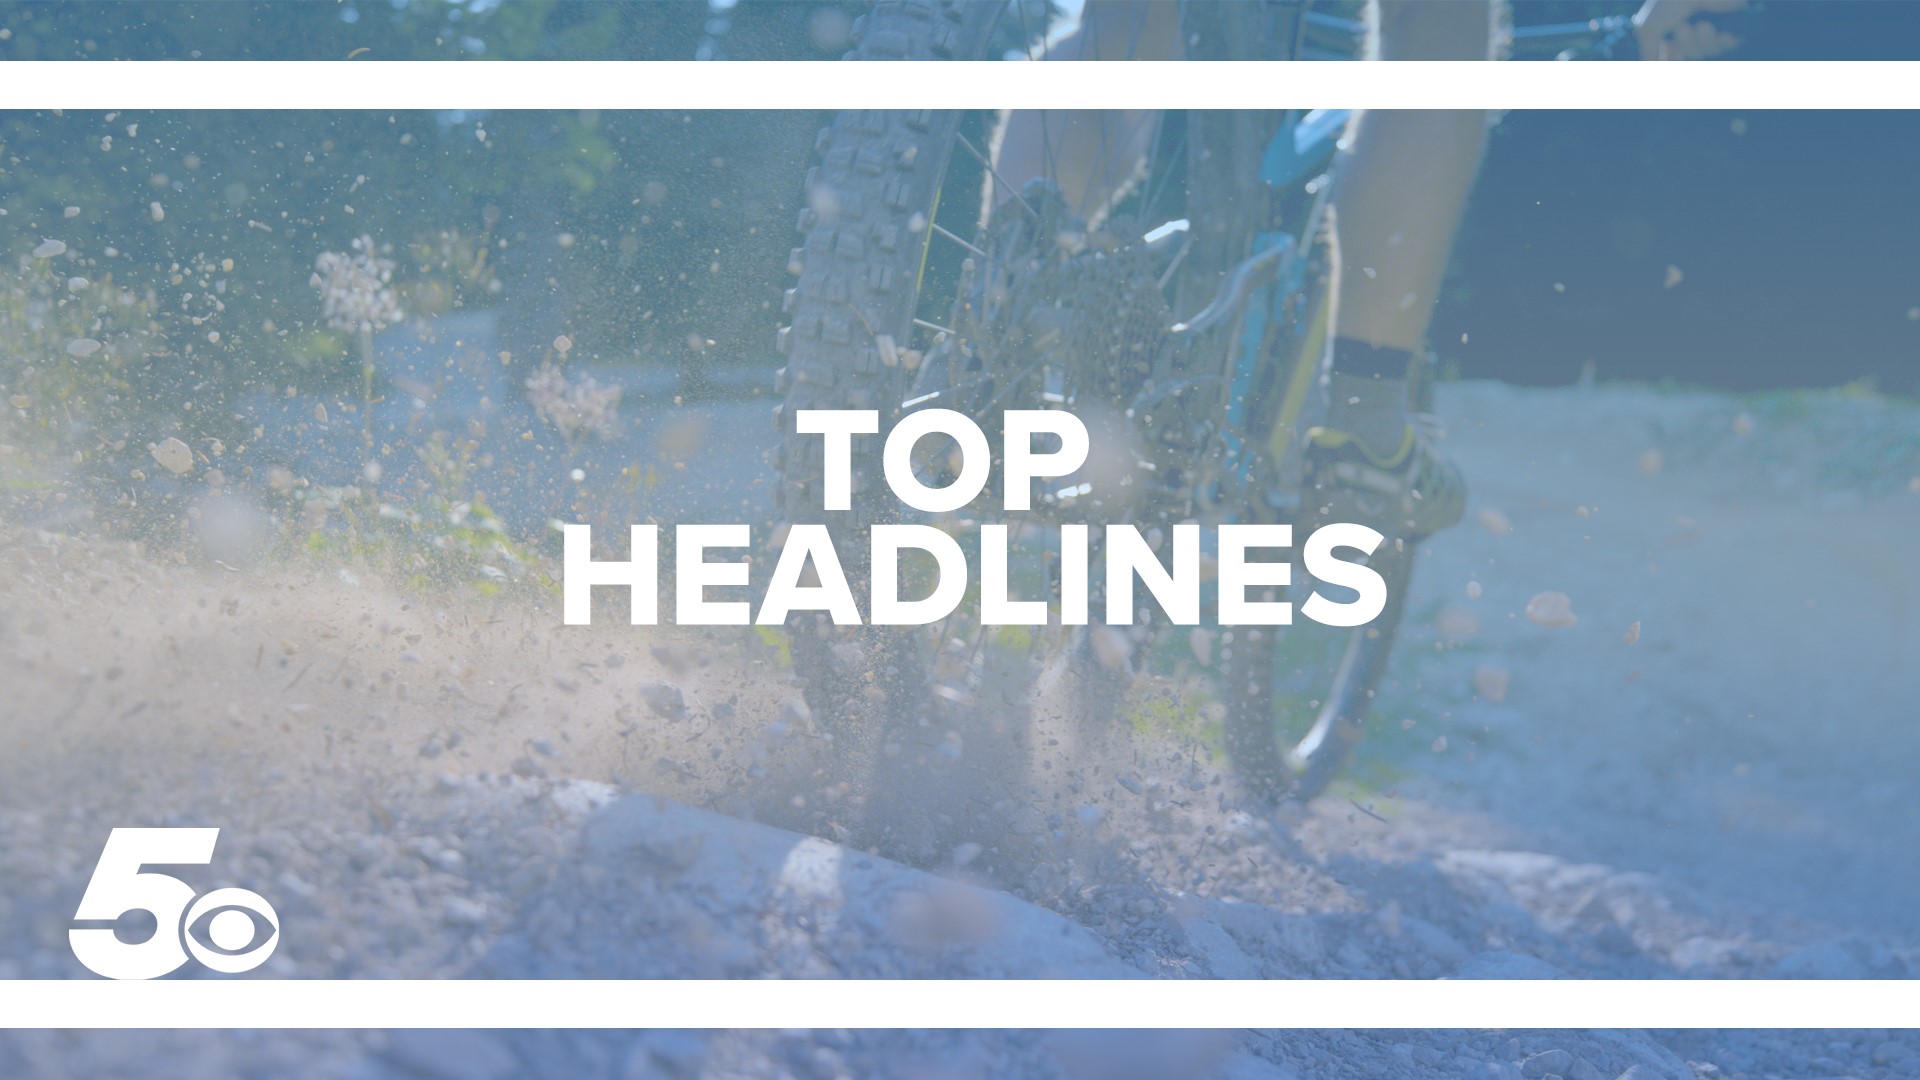 Take a look at today's top headlines for local news across the area!